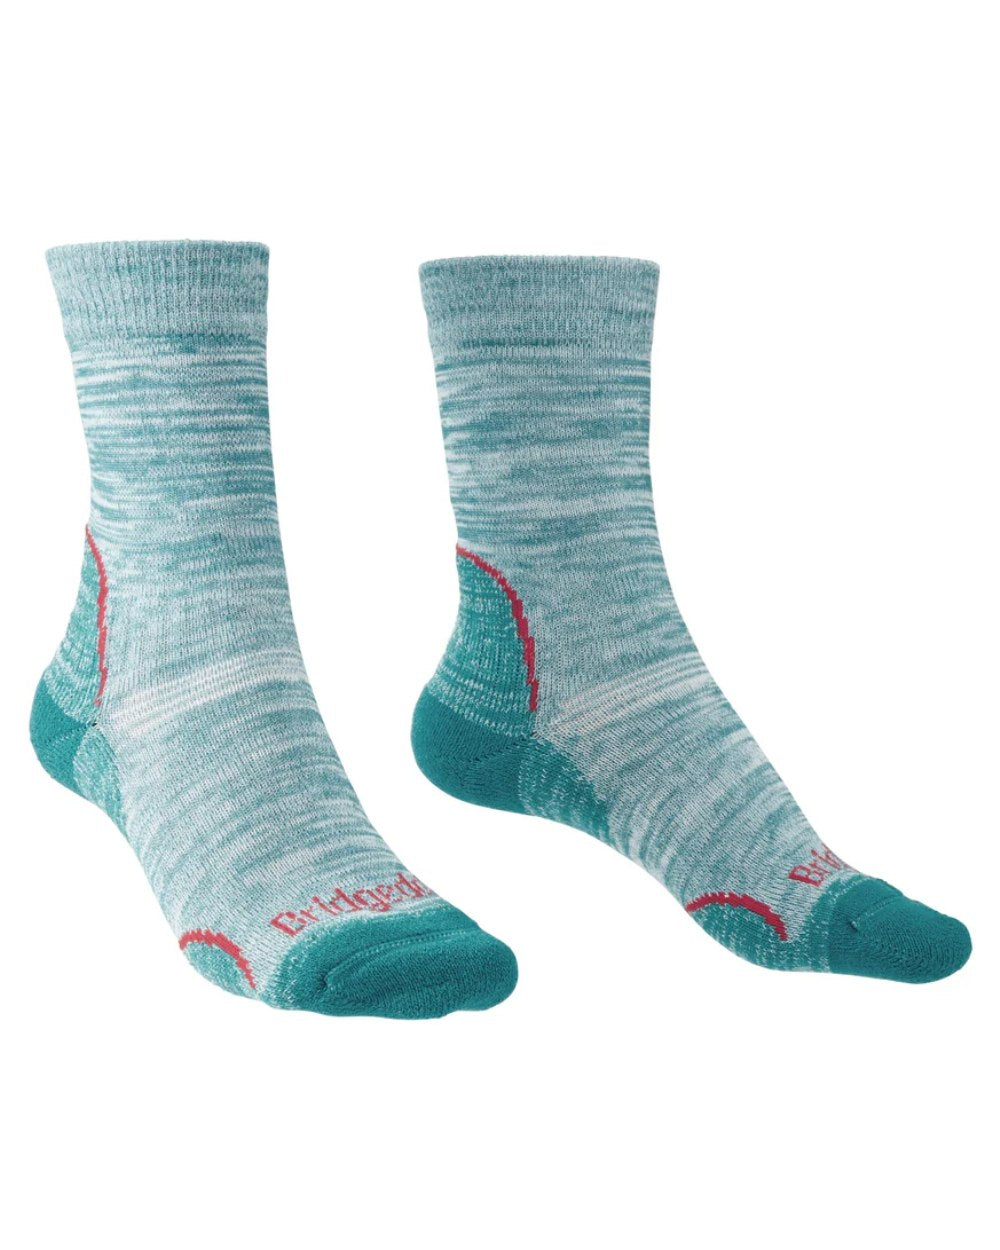 Teal Coloured Bridgedale Womens Lightweight T2 Coolmax Performance Boot Socks On A White Background 